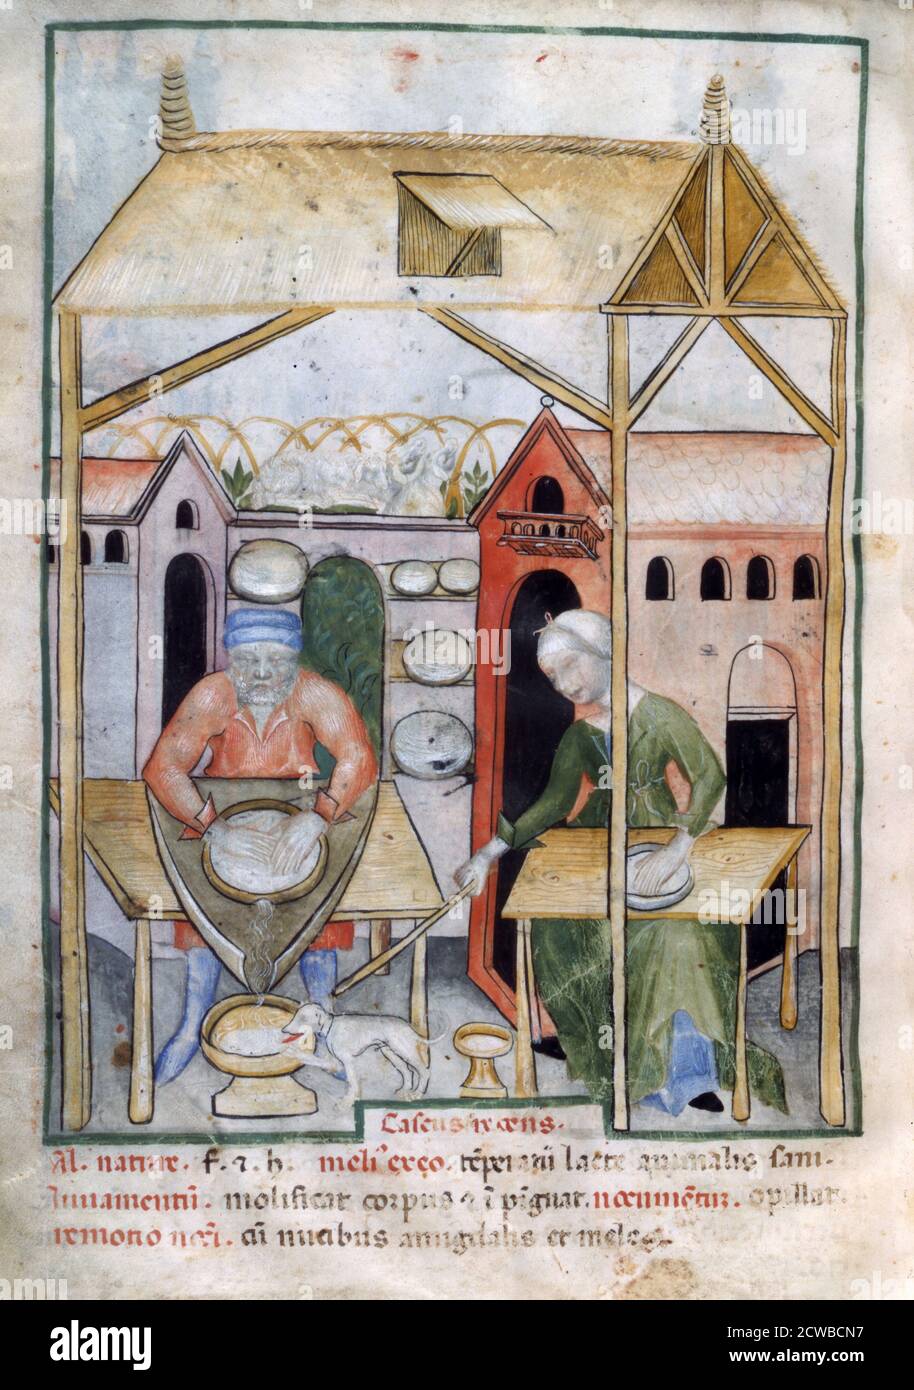 Cheese manufacture, 1390-1400. A woman waves a stick at a dog drinking the whey from some freshly made cheese. Illustration from Tacuinum Sanitatis, illuminated medical manual based on texts translated from Arabic into Latin, in the collection of the Bibliotheque Nationale, Paris. The artist is unknown. Stock Photo